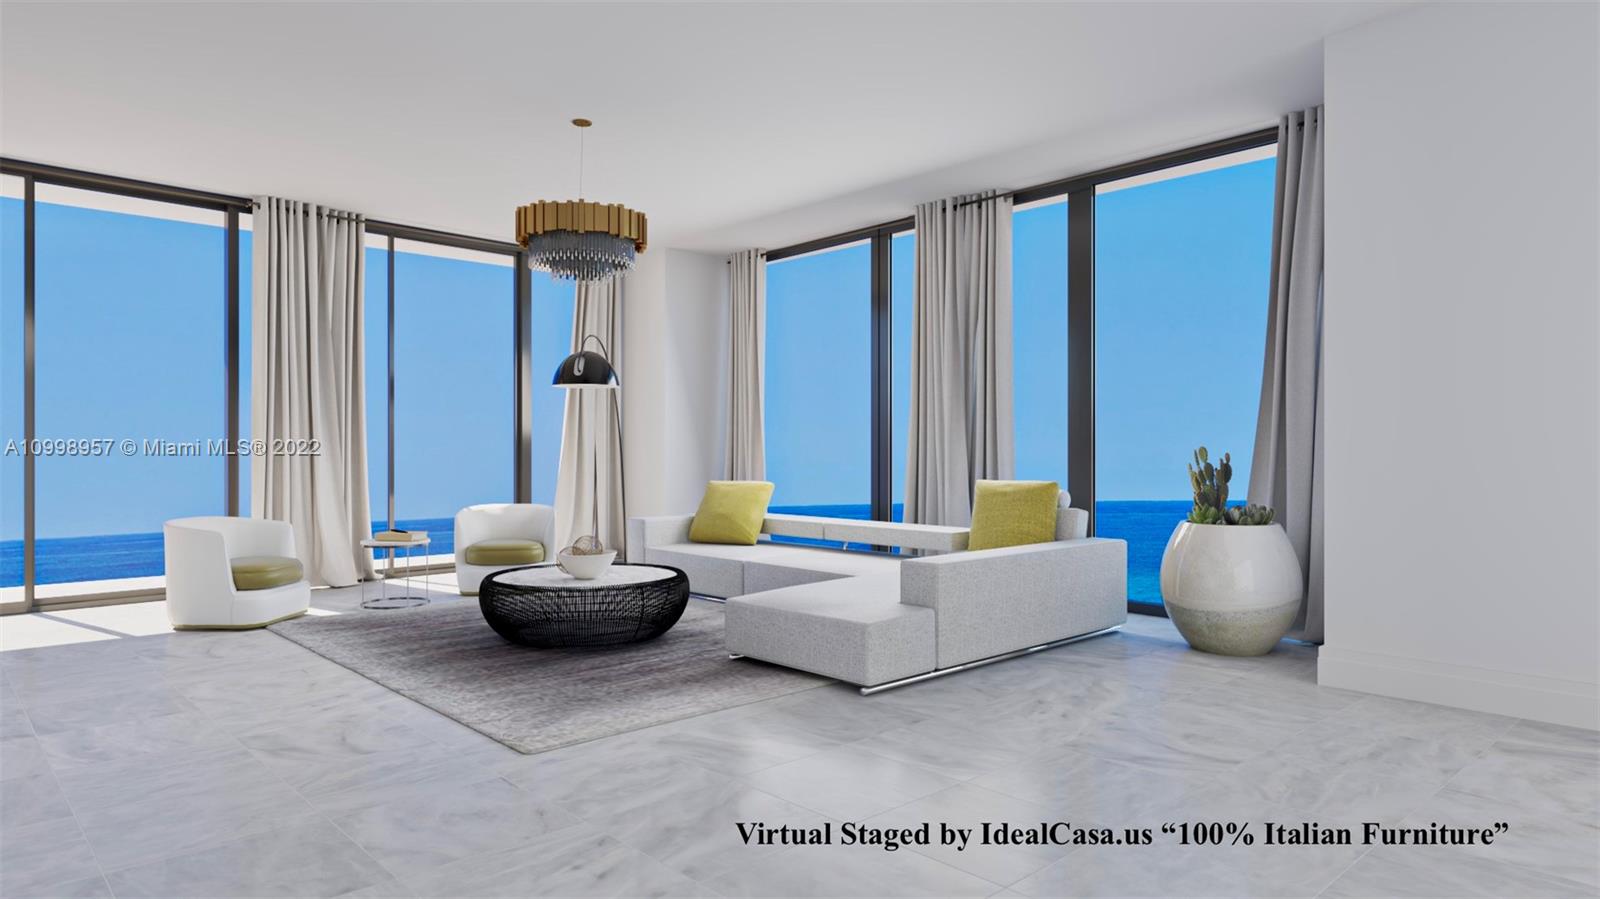 Turnberry Ocean Club Luxury Residences Sunny Isles Beach. , investment property yearly $336K gross income New construction 2021. Unit 1804 South. Direct Ocean views and Bay views. 4 Bedrooms plus den & 5 1/2 Baths, 3,625 SqFt plus terraces. Private elevator foyer. This unit has 10' Ceilings, very illuminated. Italian Kitchen "Snaidero", white stone countertops, top-of-the-line appliances "Gaggenau". This unit is currently rented. Master bedroom with 2 walk-in closets. Large master Bathroom. Building with six-floor amenities, beach service, three swimming pools, private dining, Hydrotherapy Spa, a fitness center, and entertainment. Bar and restaurant with full kitchen. Privileges of Turnberry Isle Resort, including golf, tennis, and Marina activities.